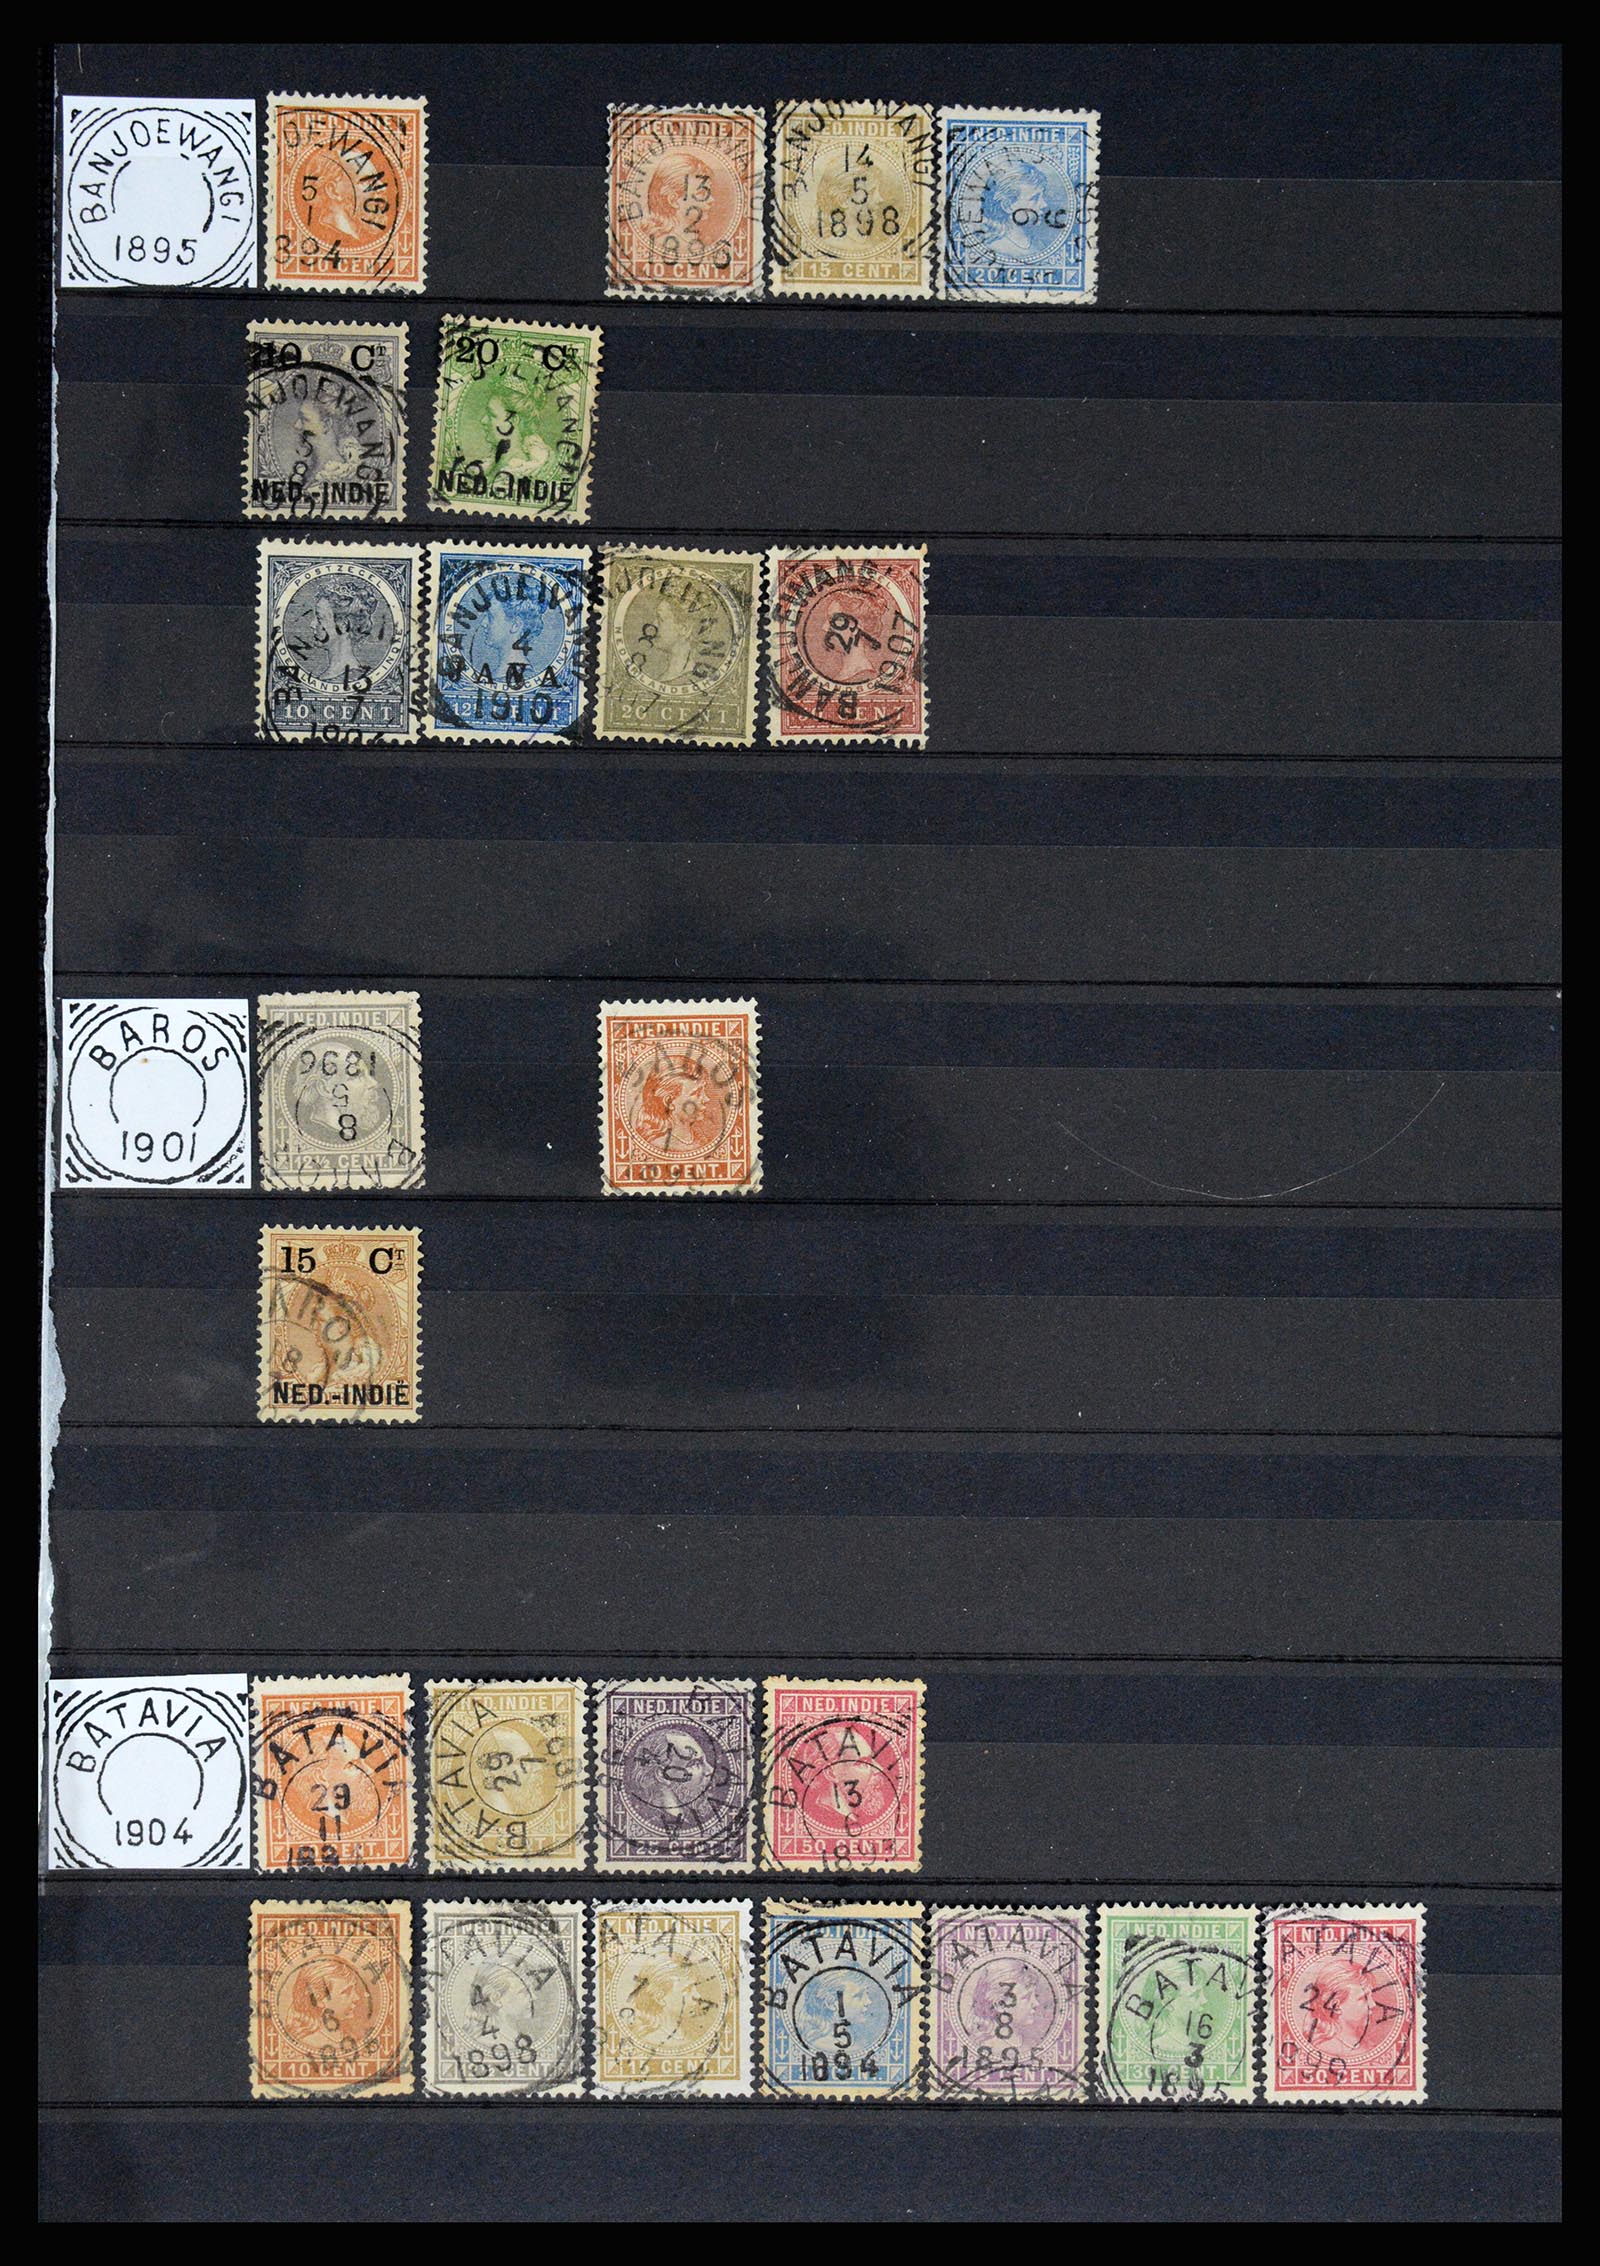 36839 006 - Stamp collection 36839 Dutch east Indies square cancels.